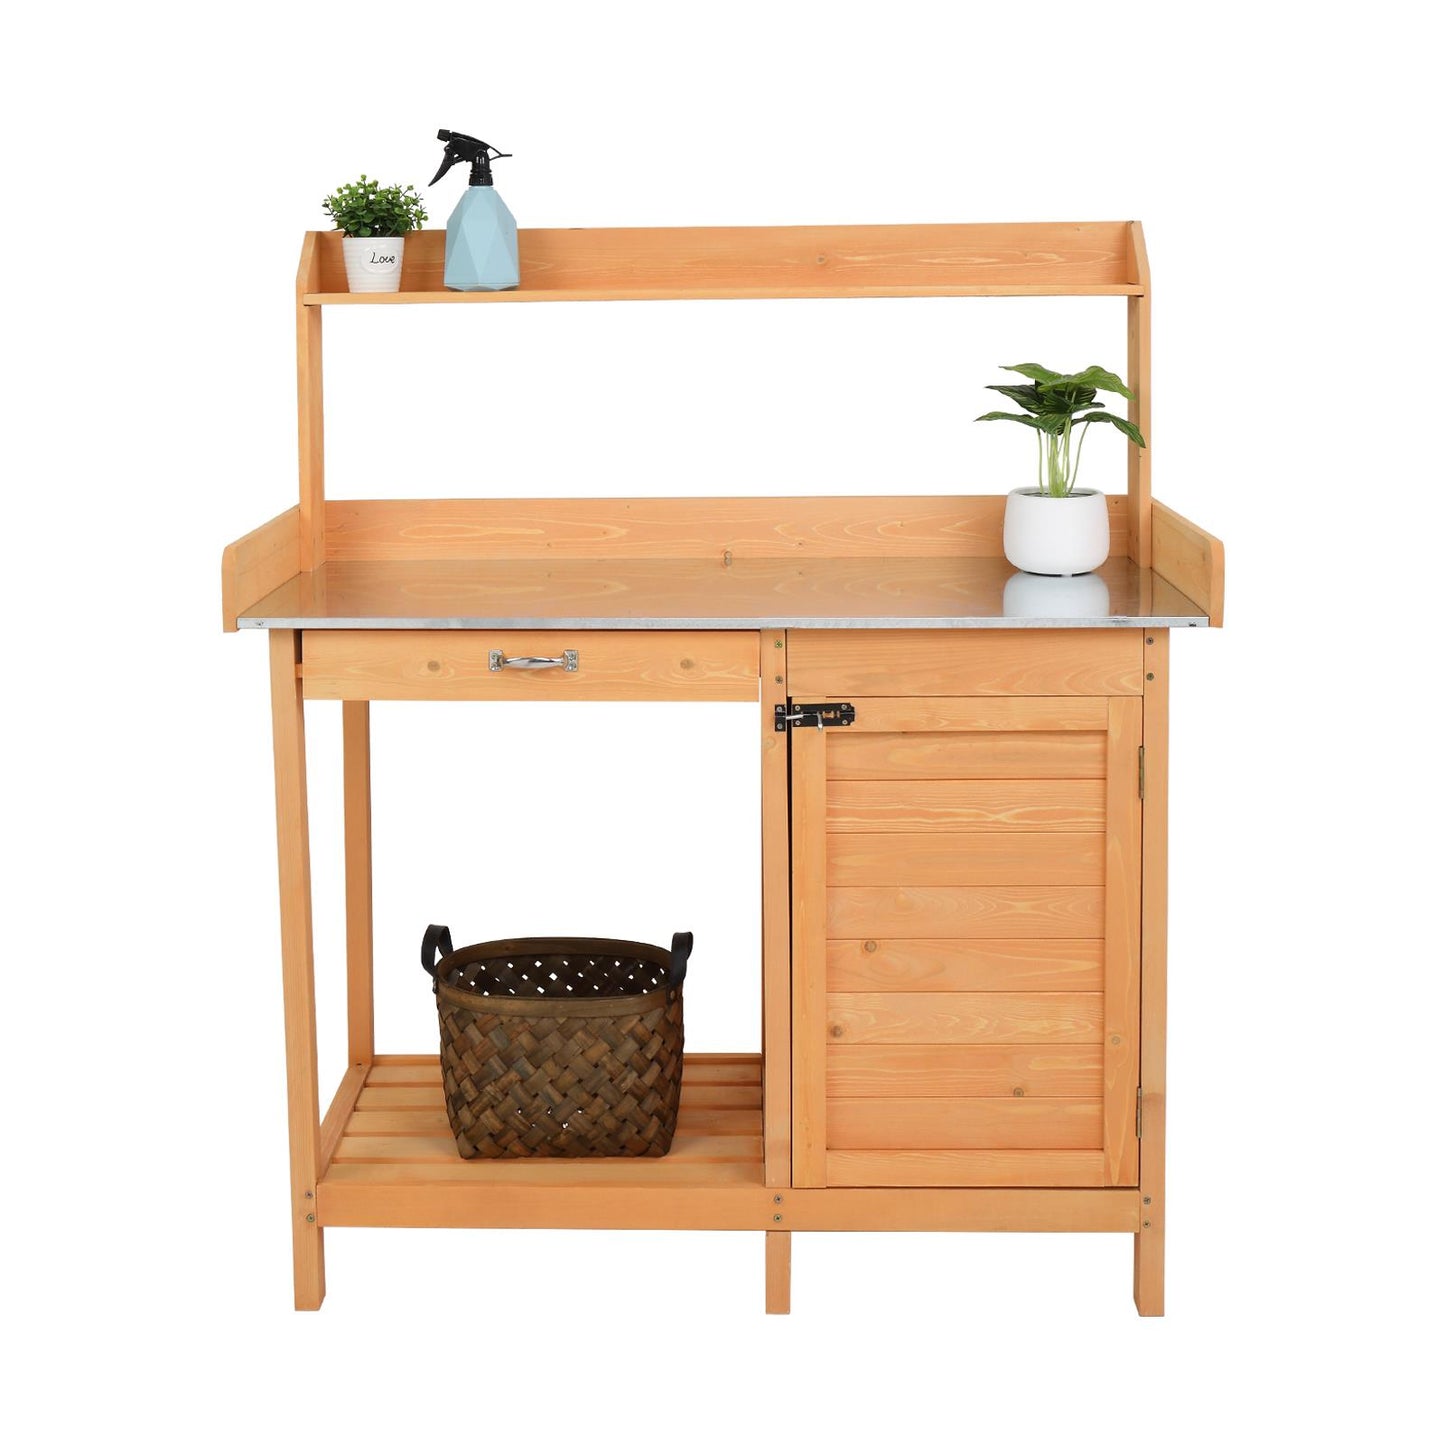 Garden Workbench With Drawers And Cabinets